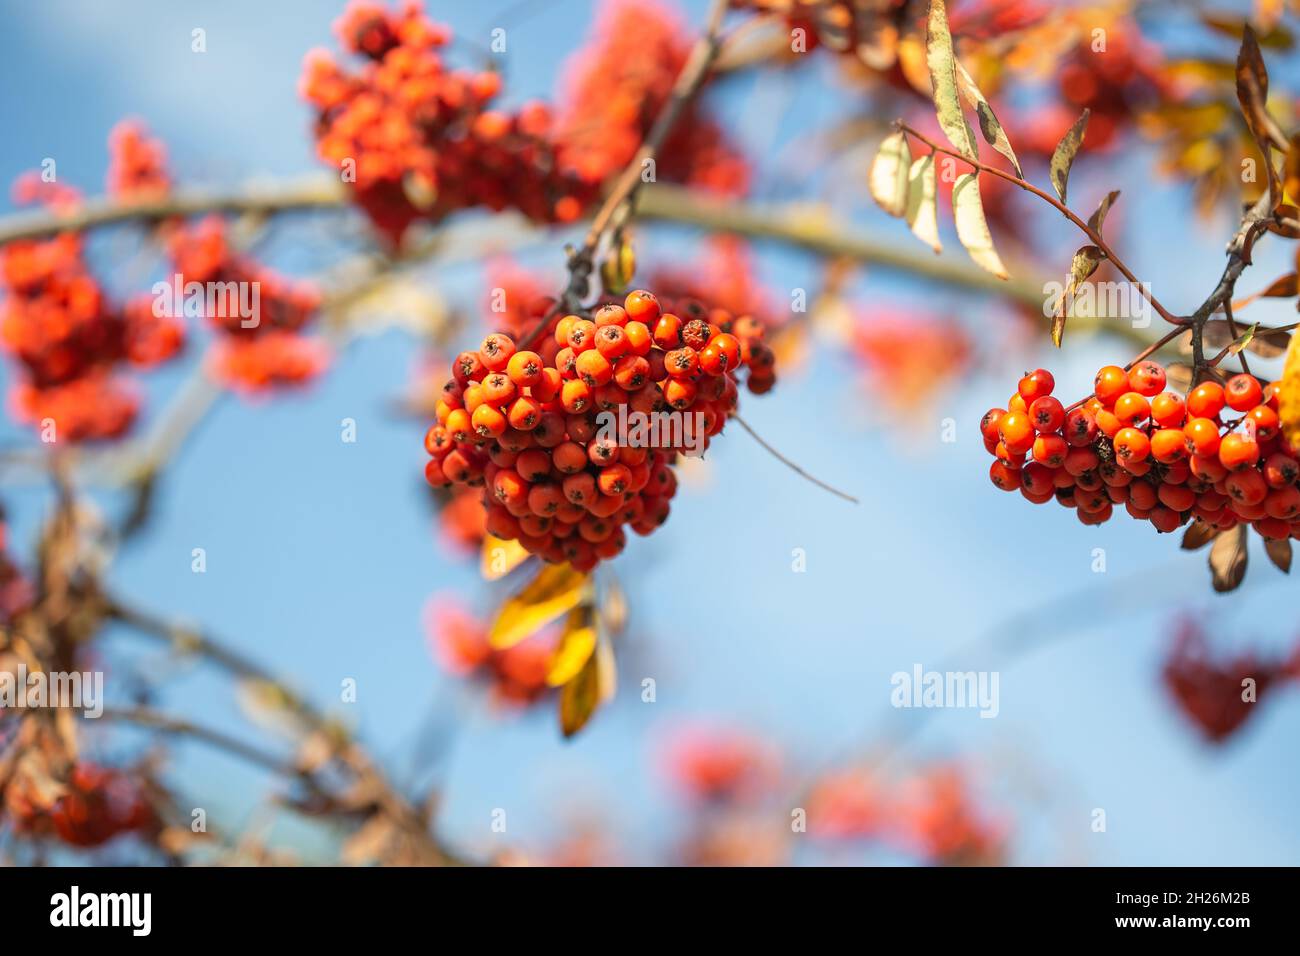 Bright red rowan berries on a branch against a blue sky Stock Photo